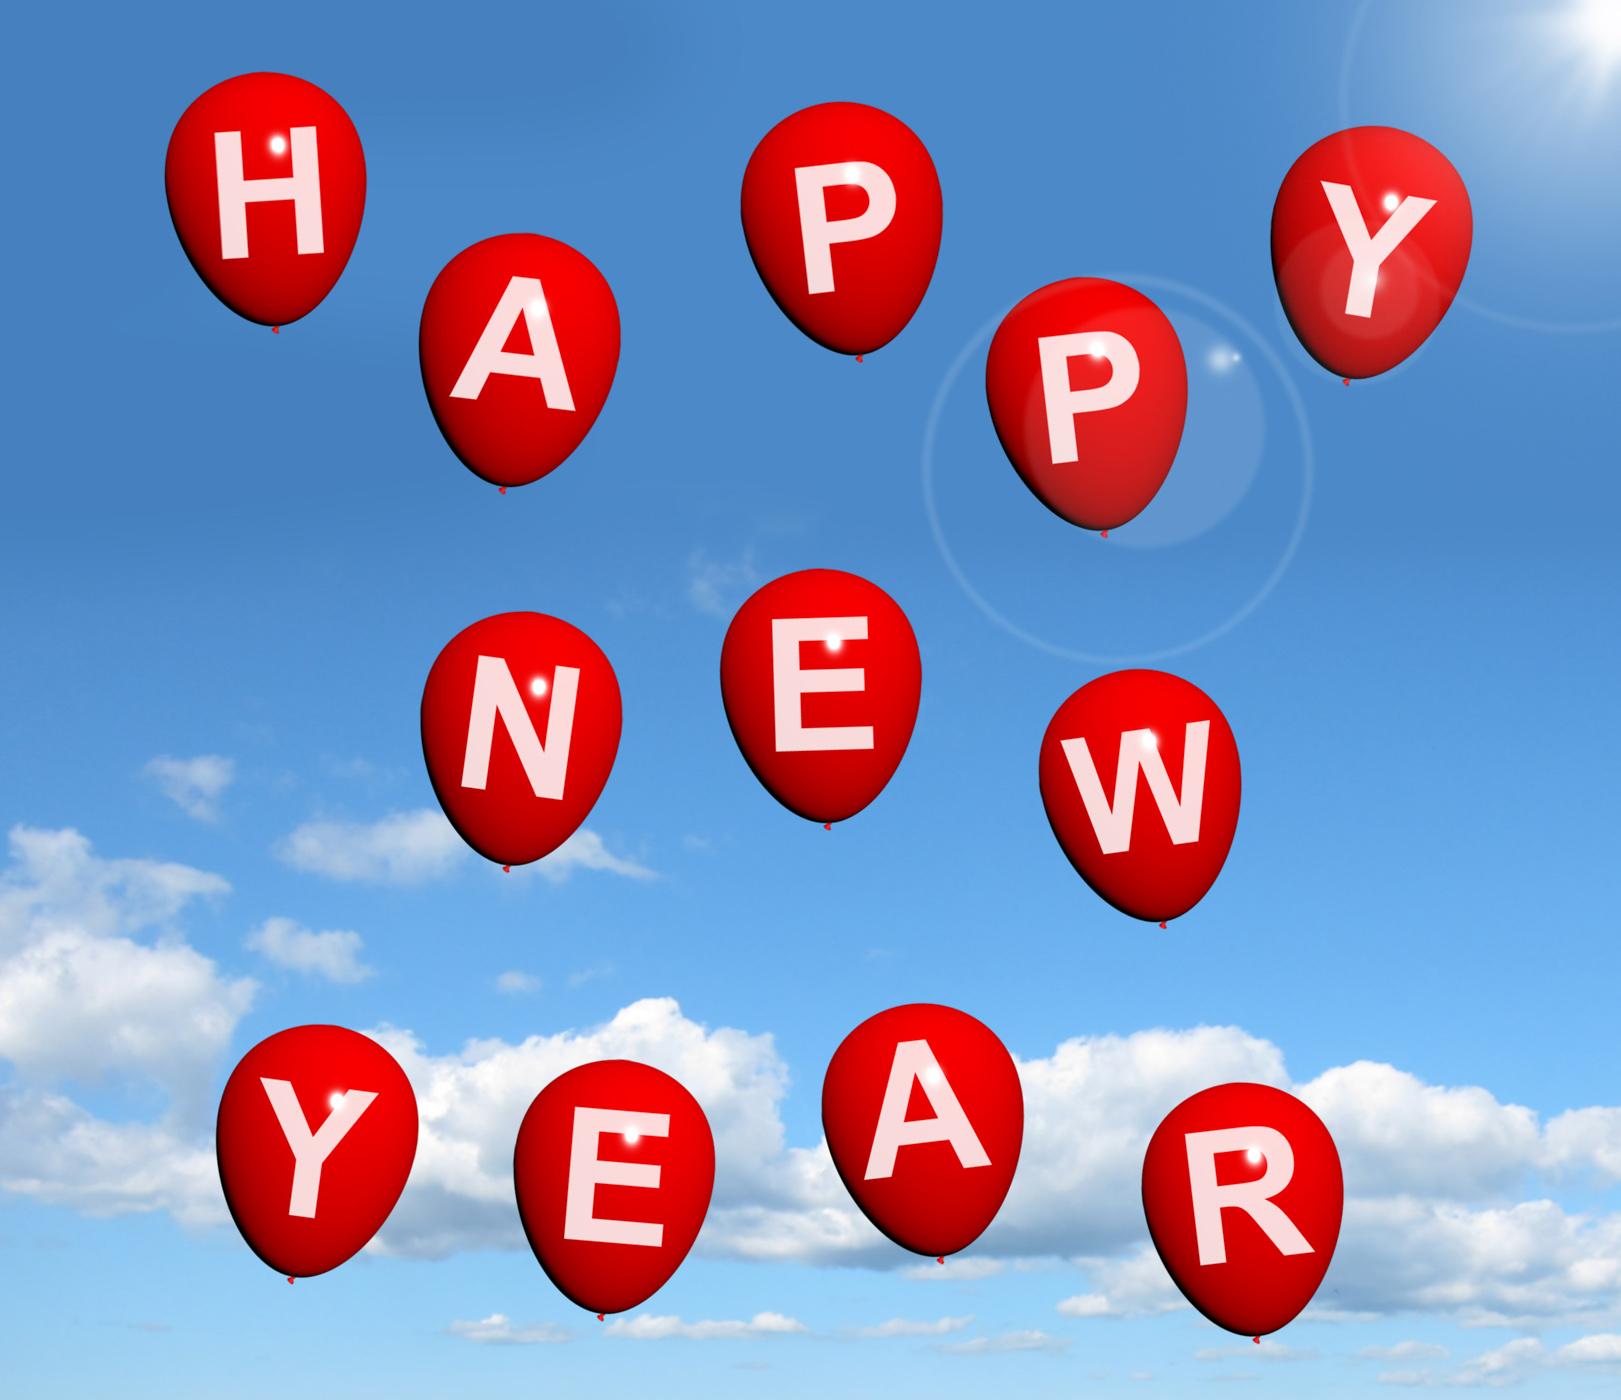 Free Photo Balloons In The Sky Spelling Happy New Year Balloon New